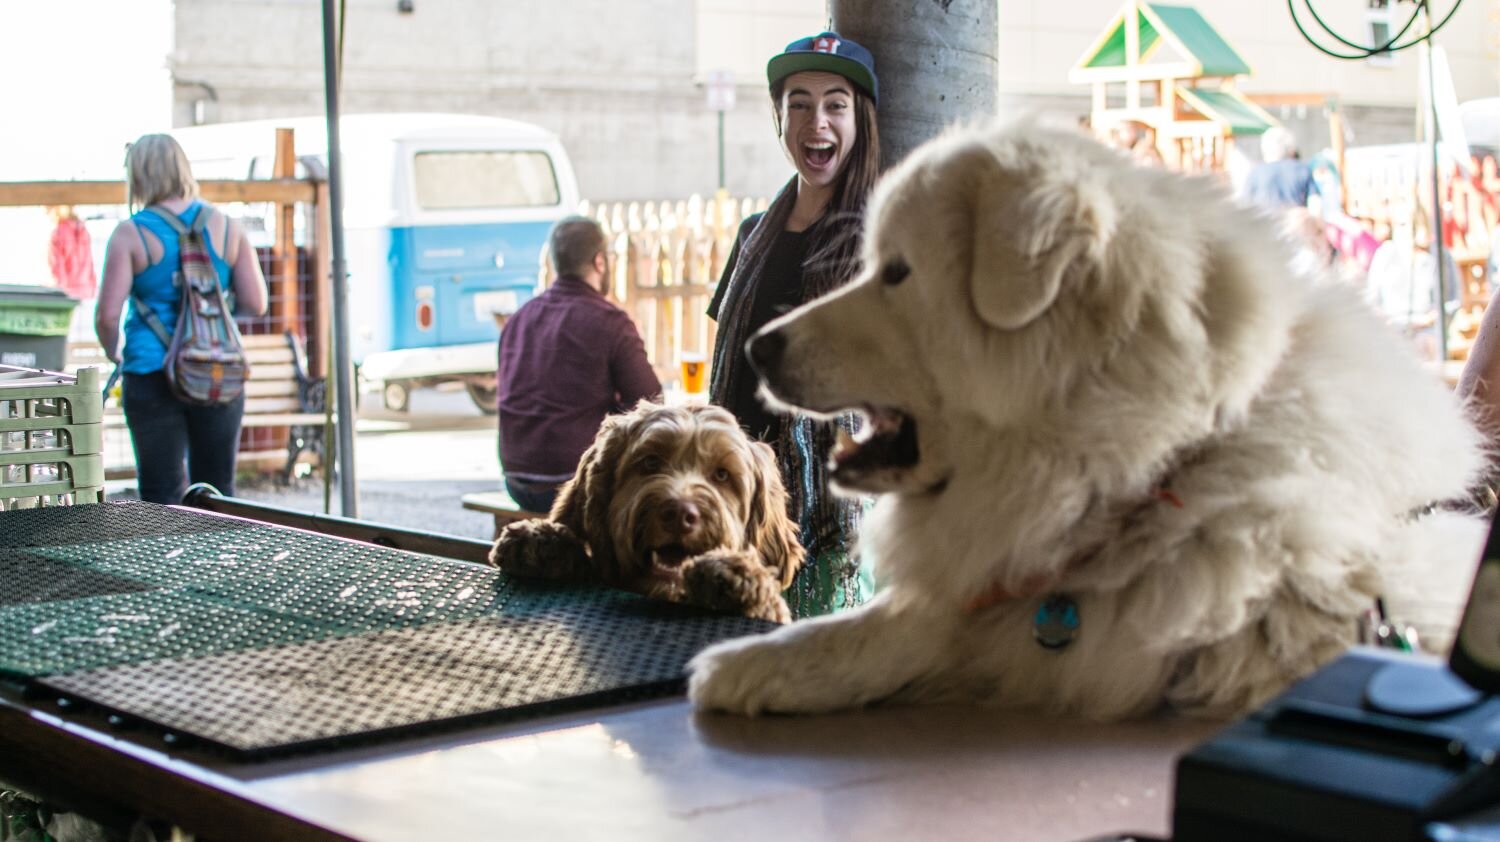 A Beer Garden fan cracks up in excitement as she sees a couple dogs hop up with their paws on the Beer Garden bar, looking for service.